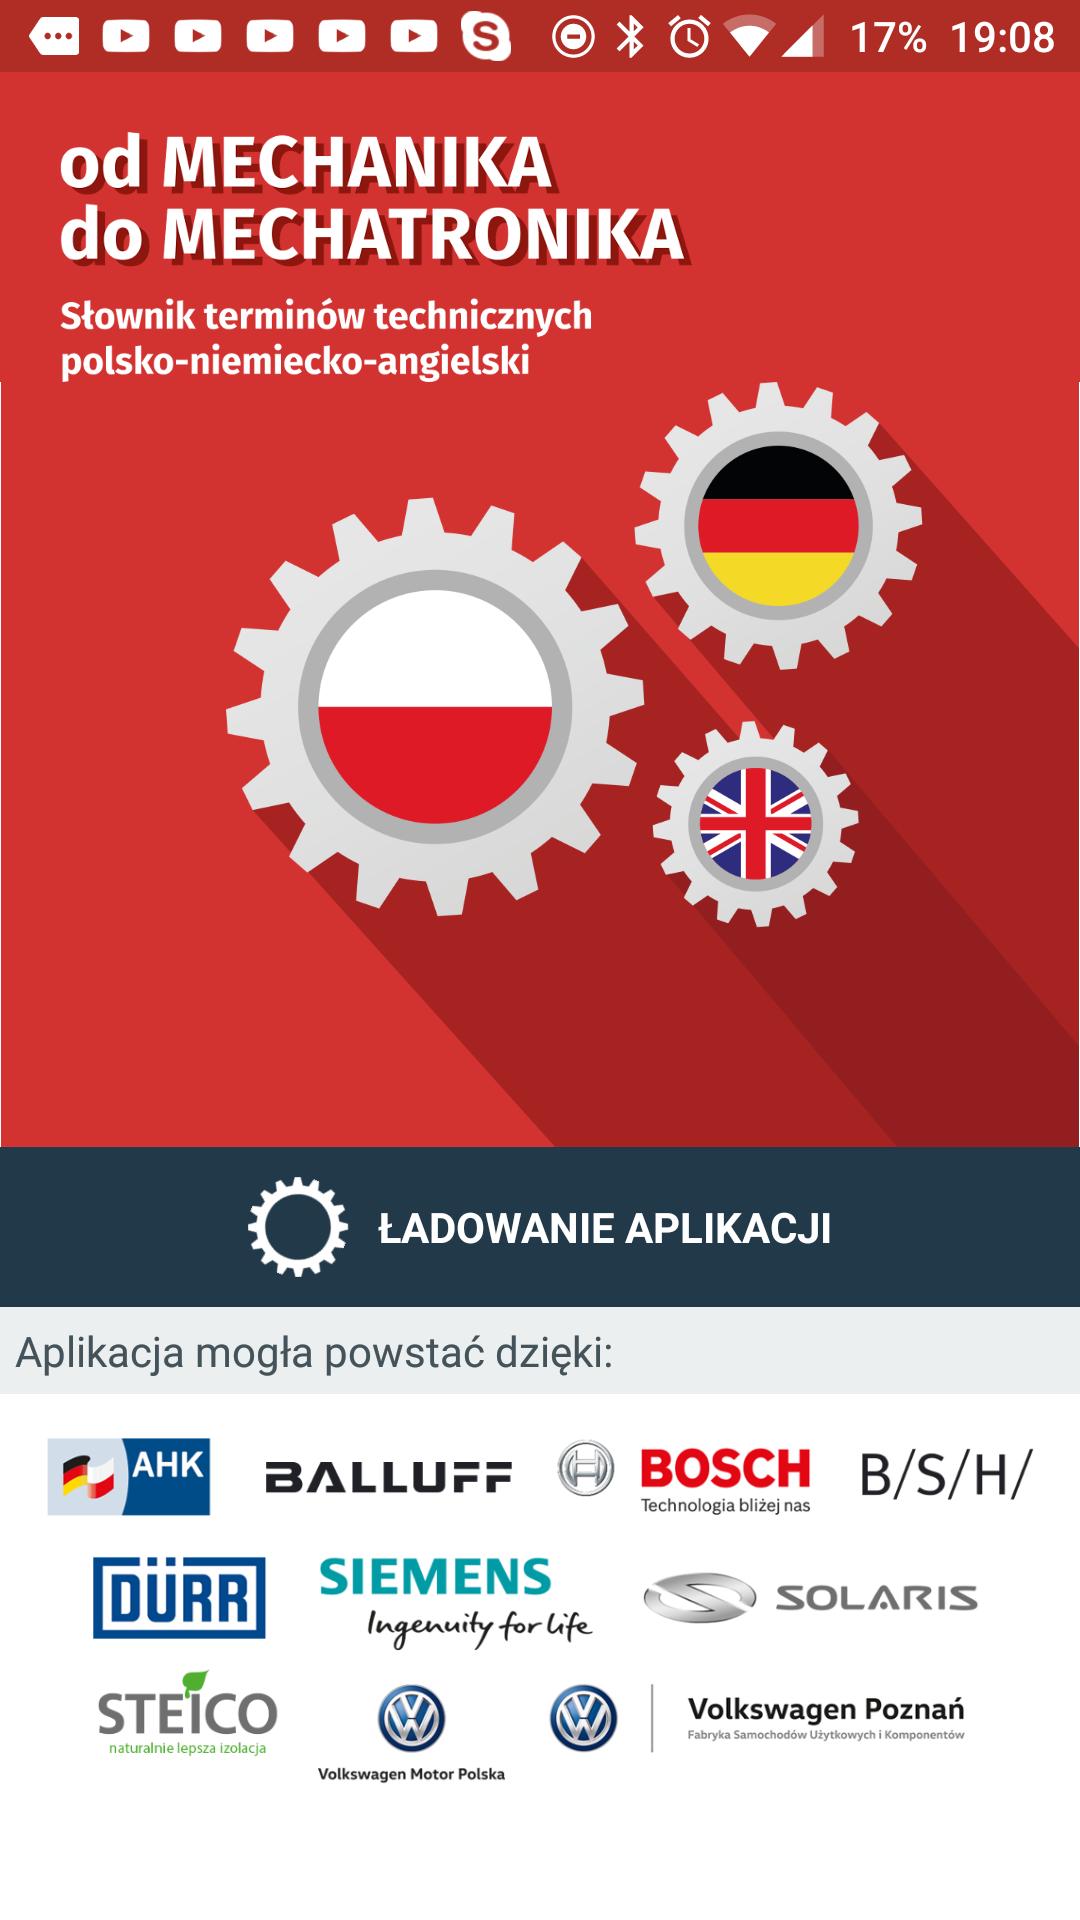 Słownik techniczny for Android - APK Download